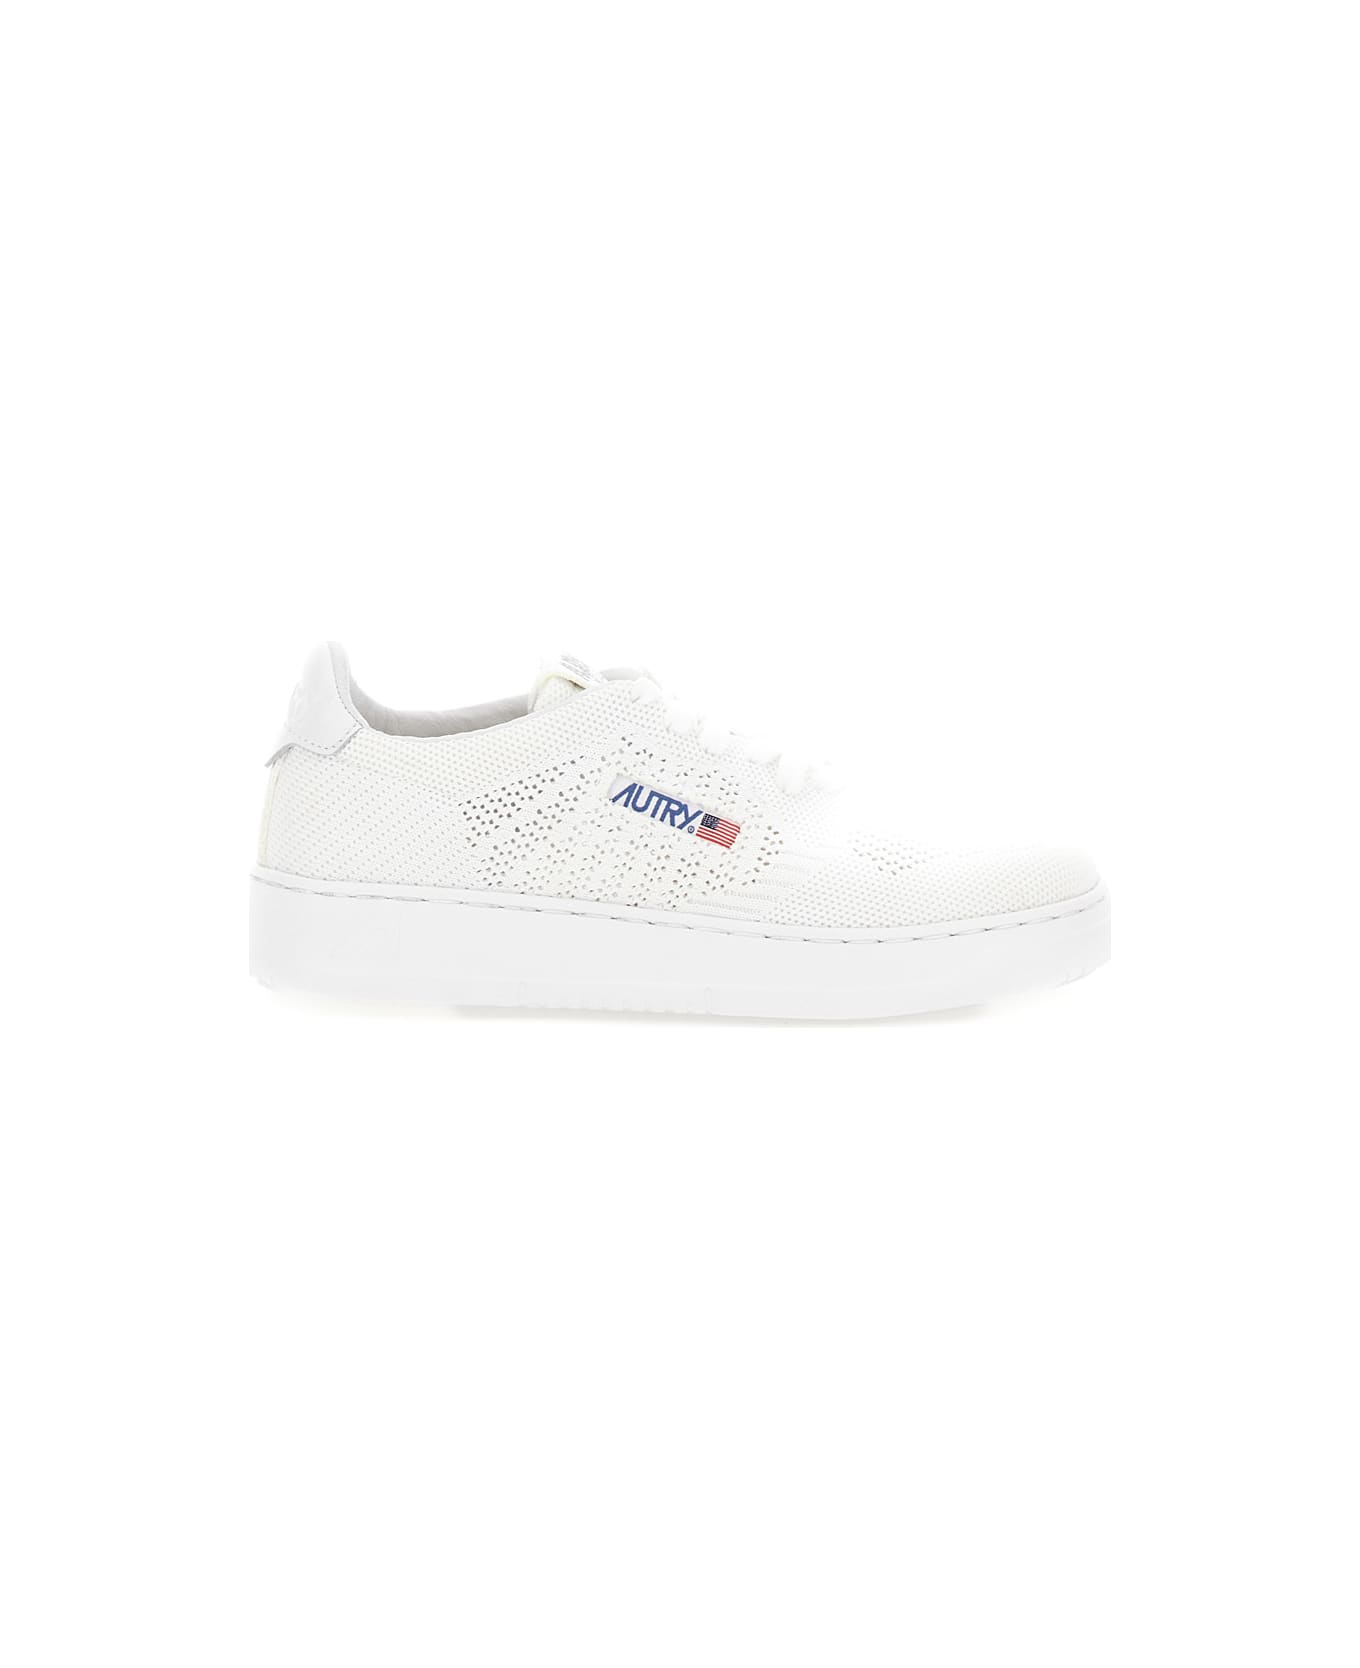 Autry Easeknit Low Wom, Knit/leat White